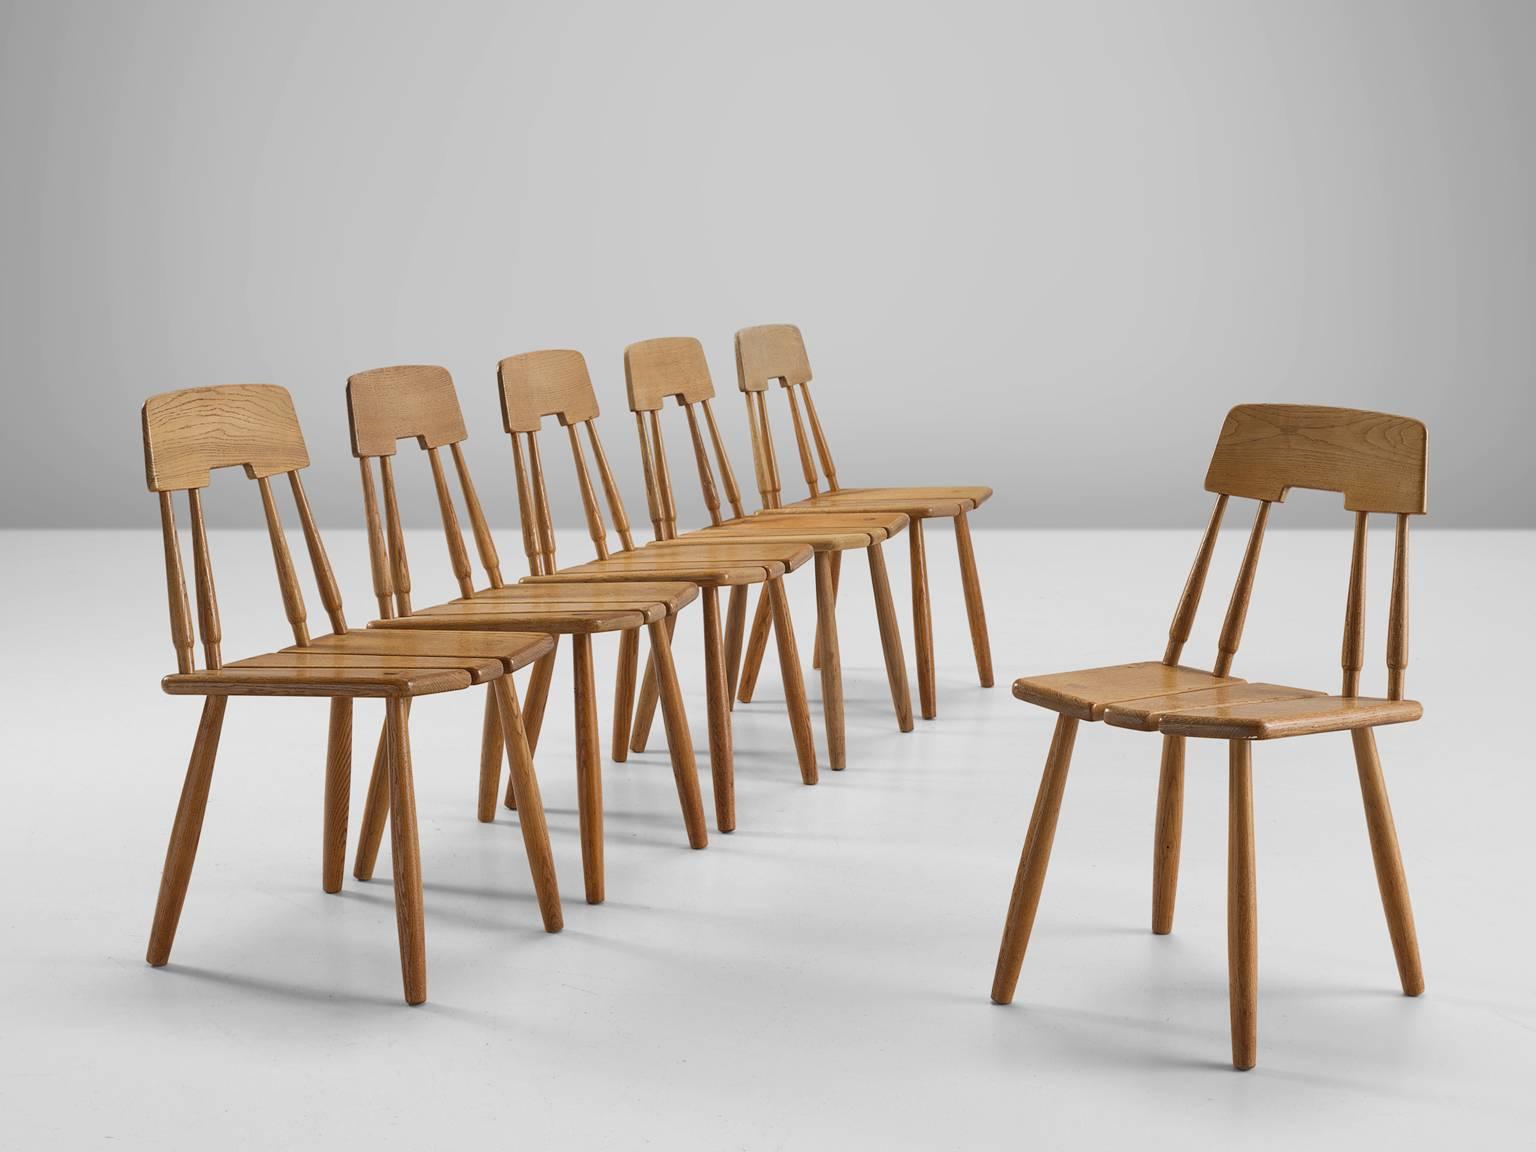 Set of six dining chairs, oak, Finland, 1950s.

This set of six chairs in solid oak features elegant details in the back. The seating consist of three slats and is detailed with wood-joints of the four legs. Four cylindrical bars with one horizontal